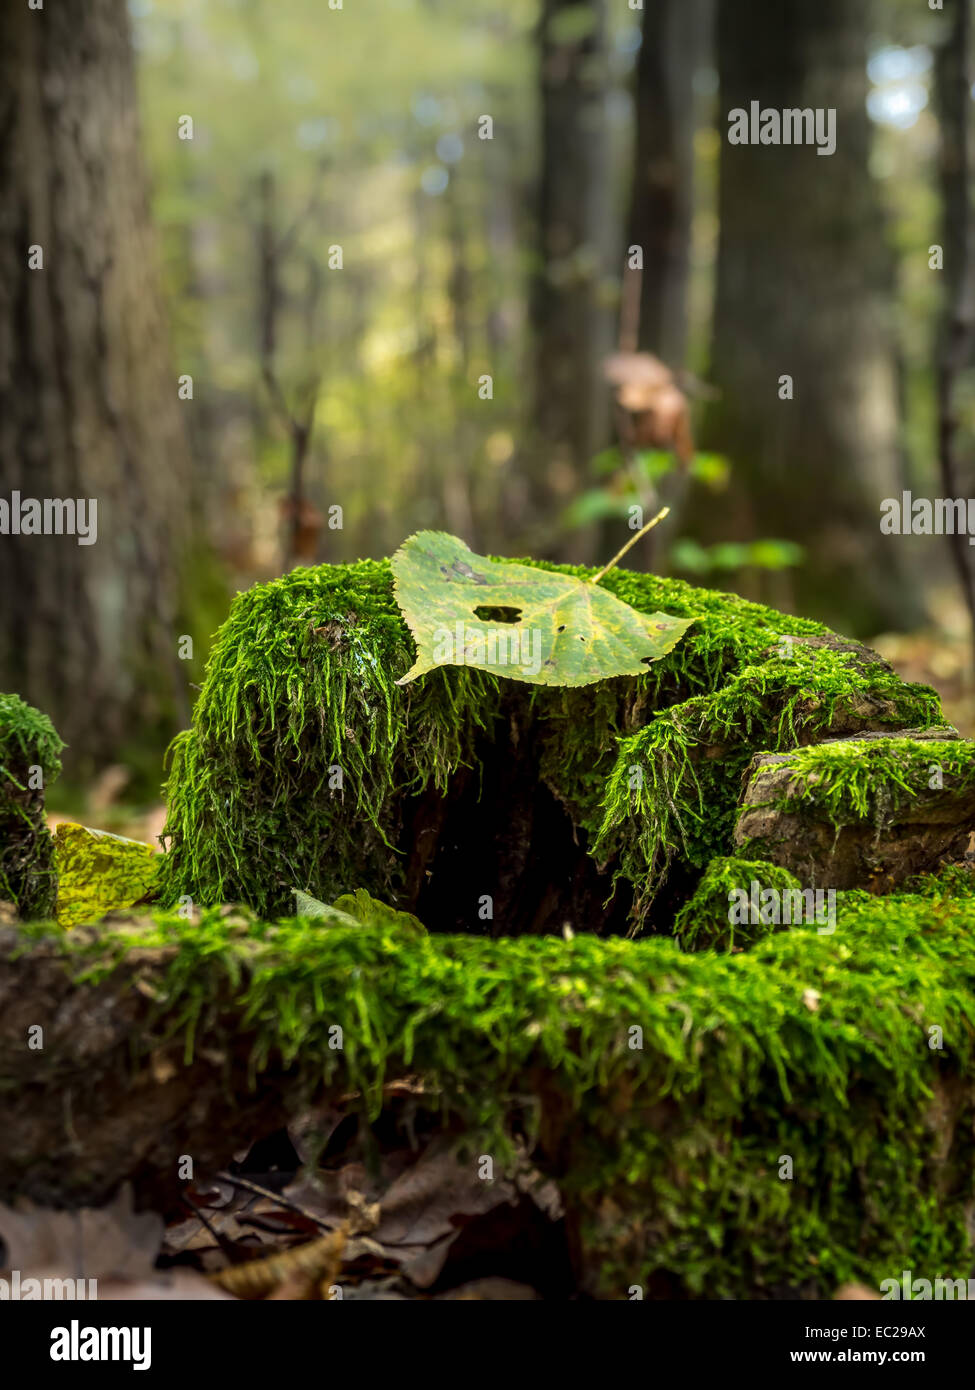 Dead leaf lying on moss-grown tree stump in the forest Stock Photo